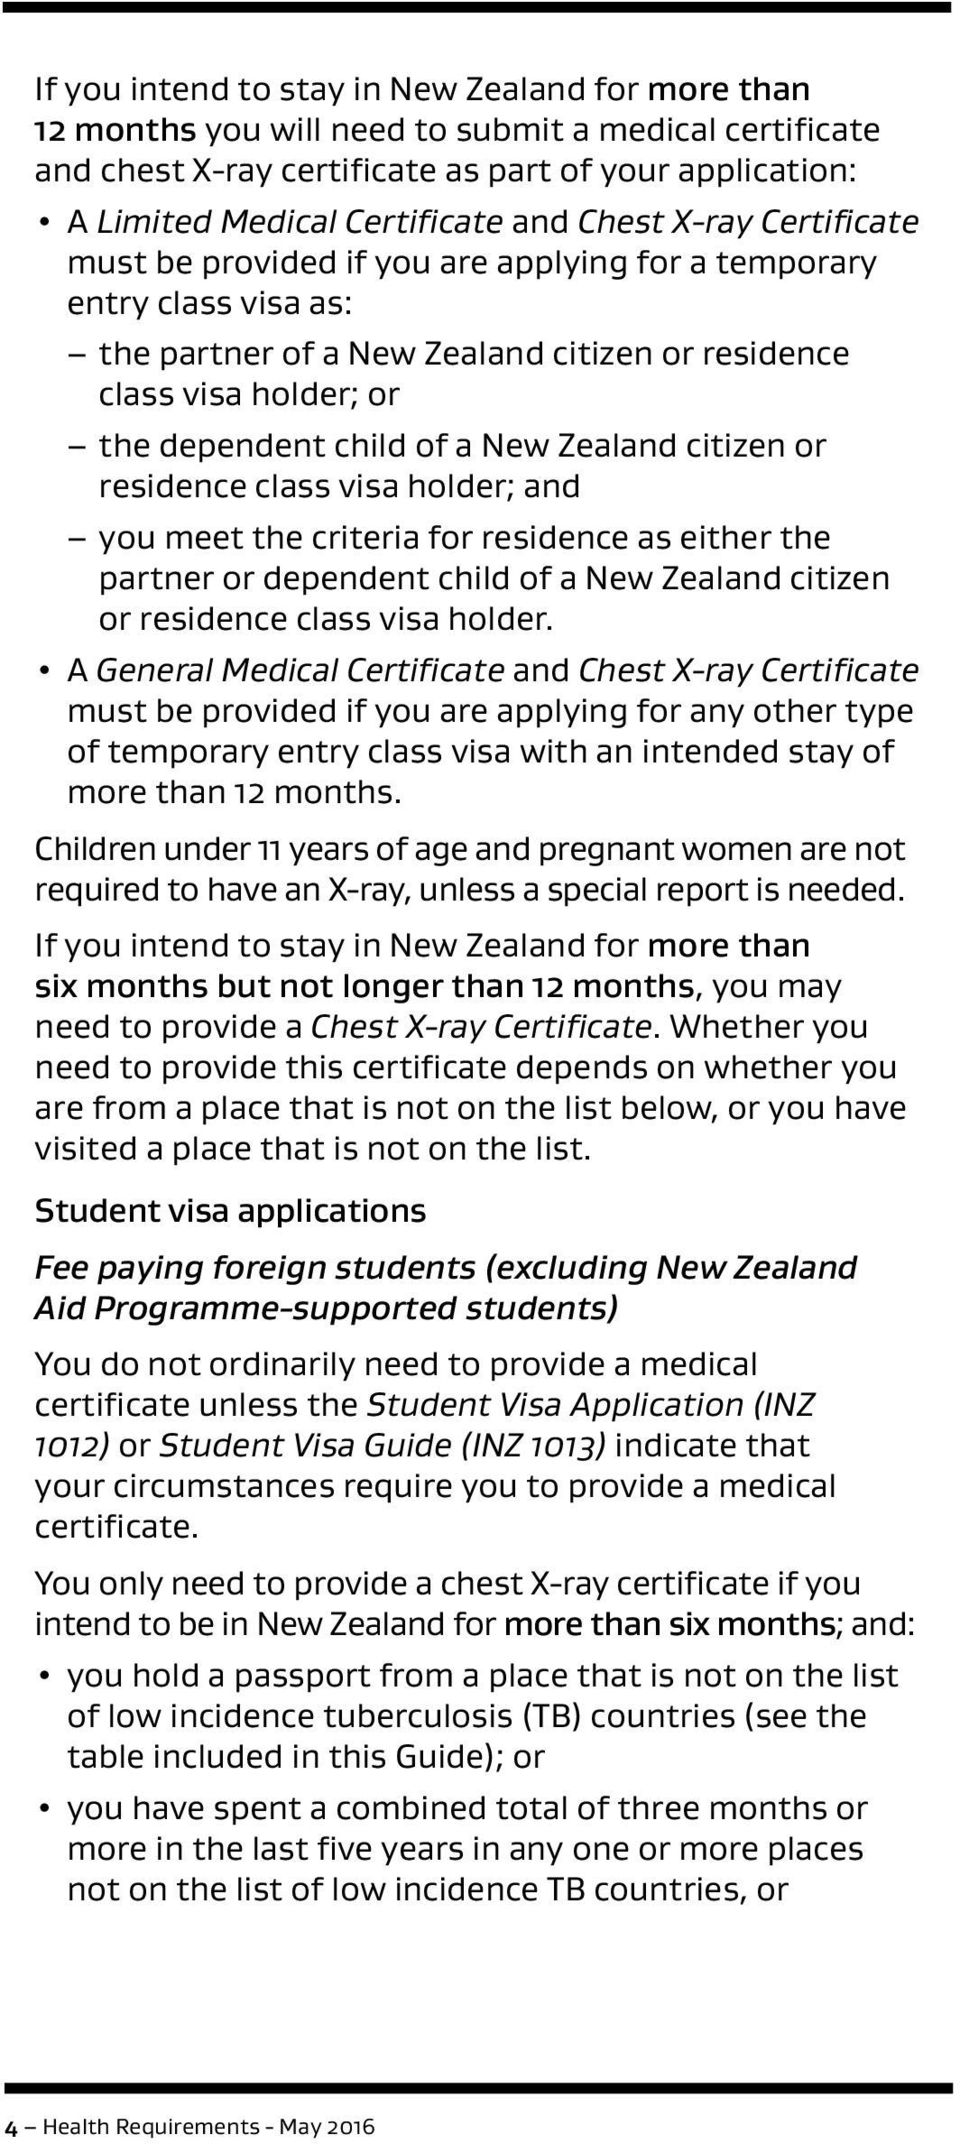 Zealand citizen or residence class visa holder; and you meet the criteria for residence as either the partner or dependent child of a New Zealand citizen or residence class visa holder.